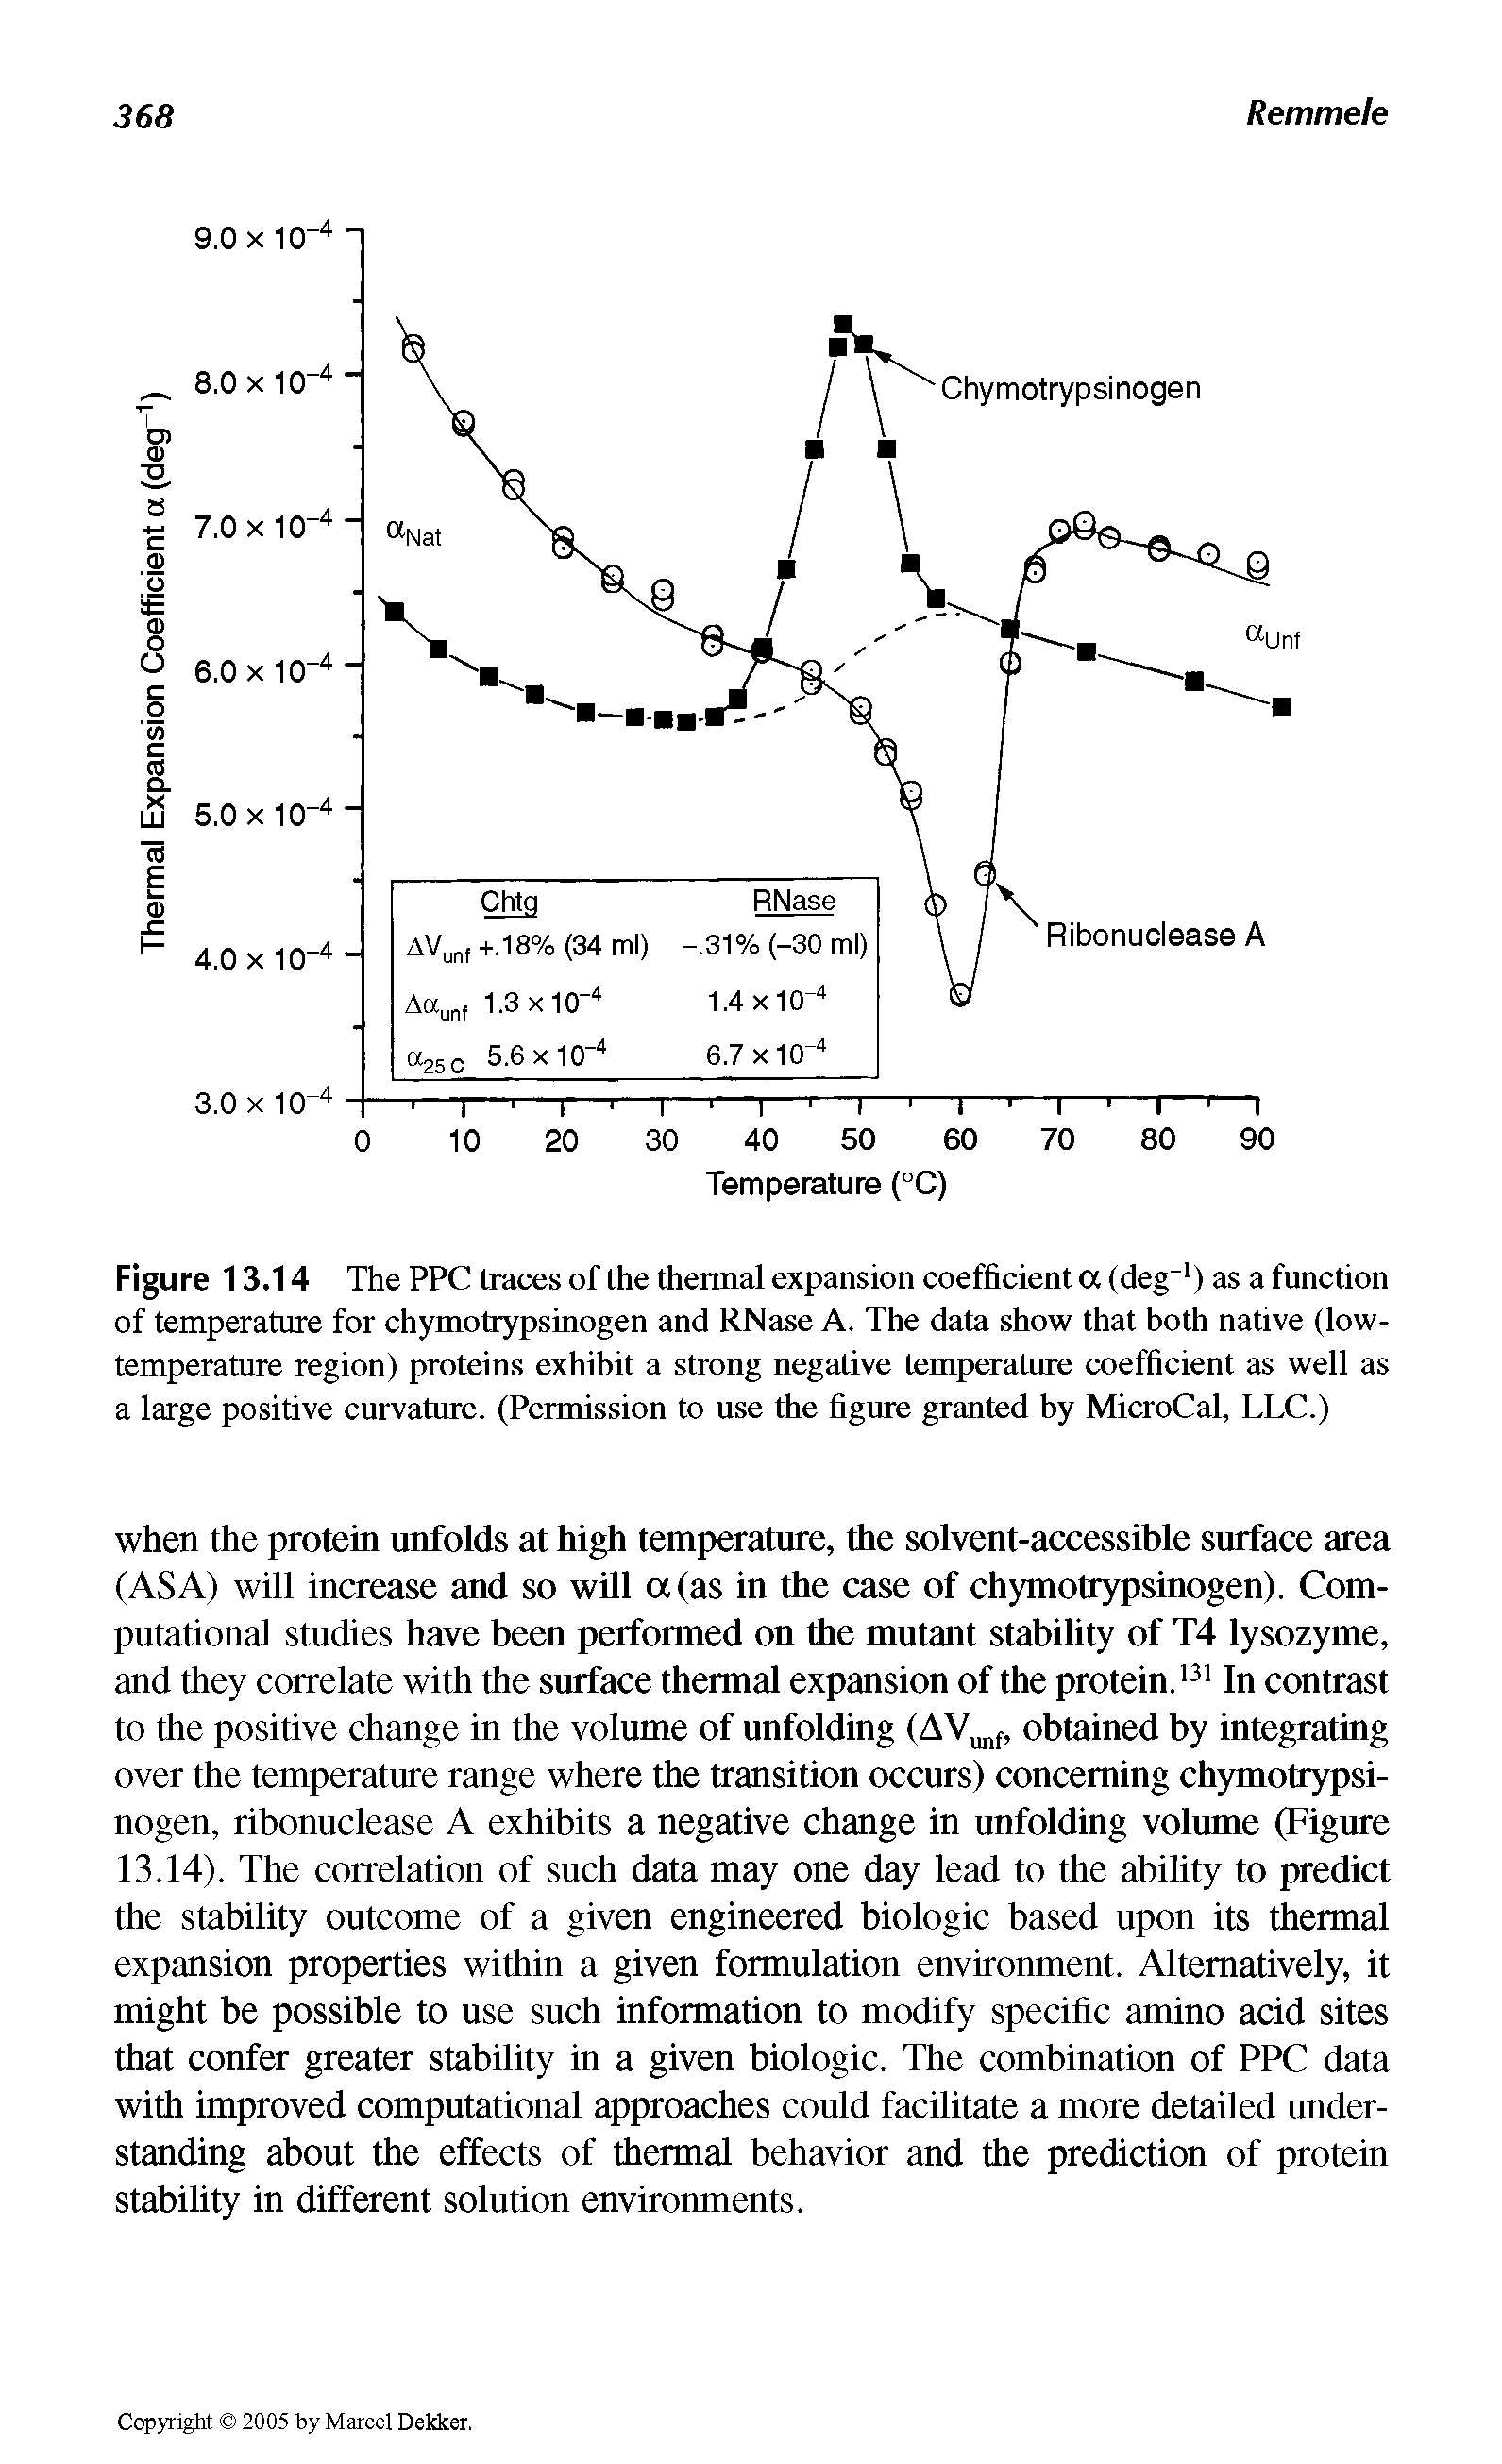 Figure 13.14 The PPC traces of the thermal expansion coefficient a (deg-1) as a function of temperature for chymotrypsinogen and RNase A. The data show that both native (low-temperature region) proteins exhibit a strong negative temperature coefficient as well as a large positive curvature. (Permission to use the figure granted by MicroCal, LLC.)...